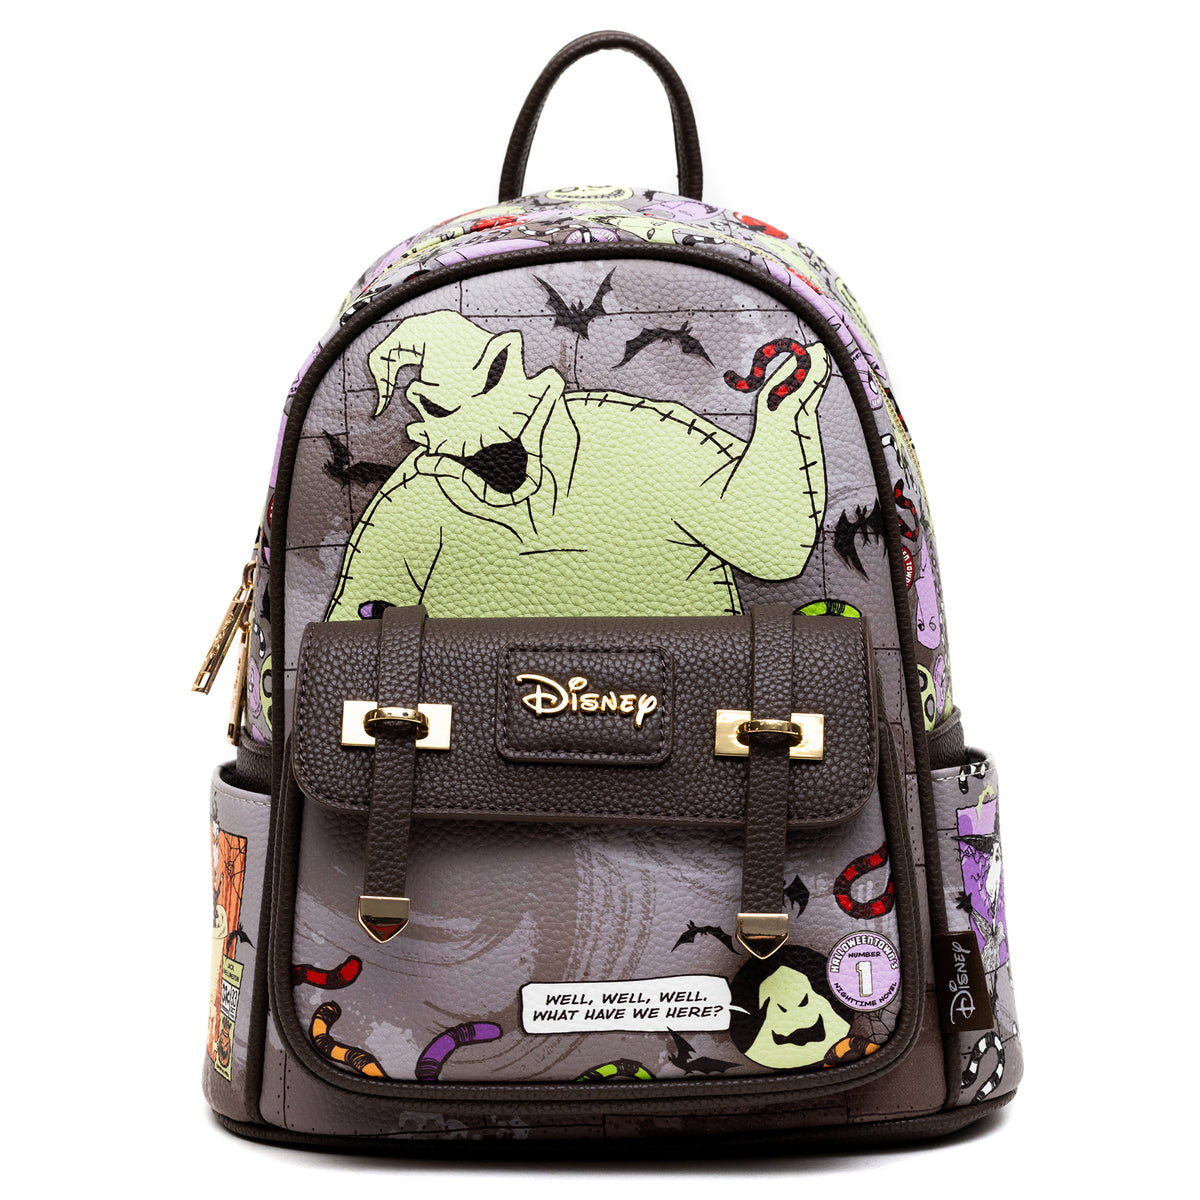 Nightmare Before Christmas Oogie Boogie Mini Backpack - Limited Edition